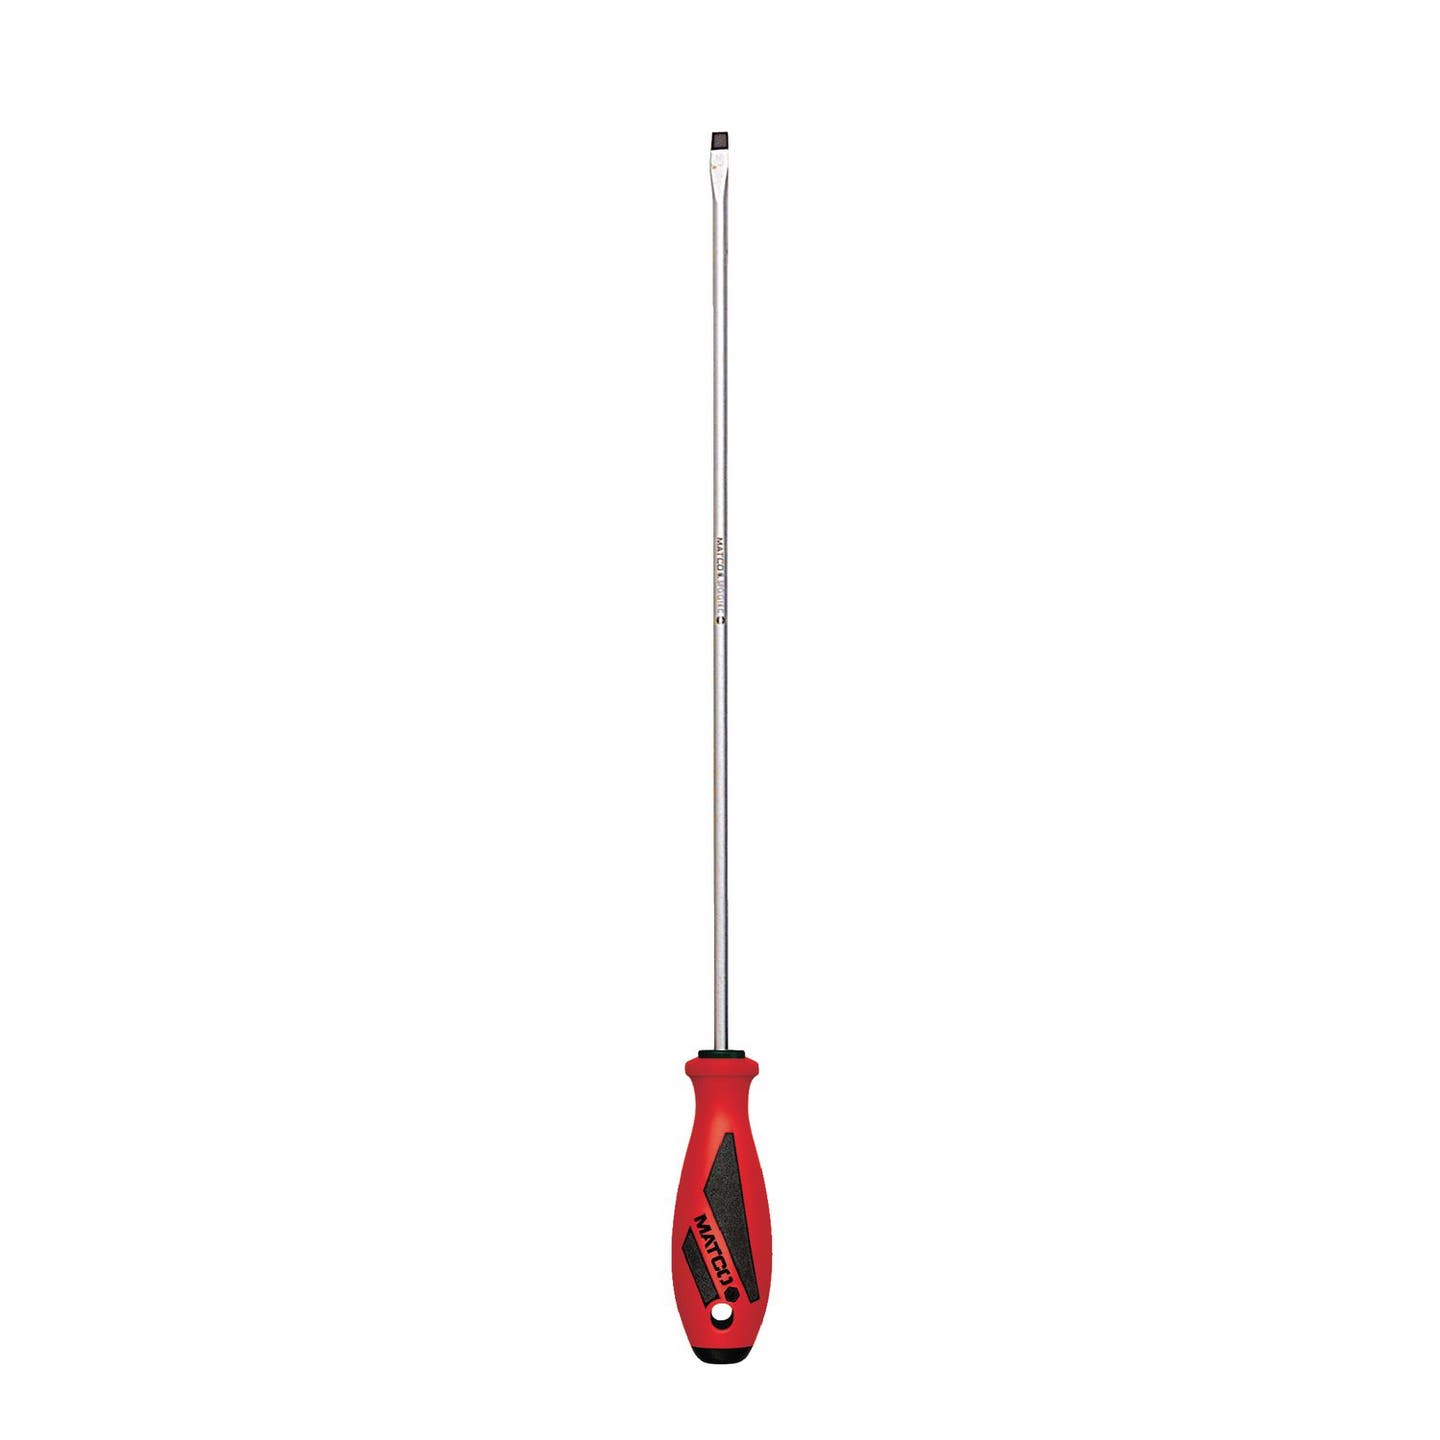 1/4" X 14" SLOTTED SCREWDRIVER - RED